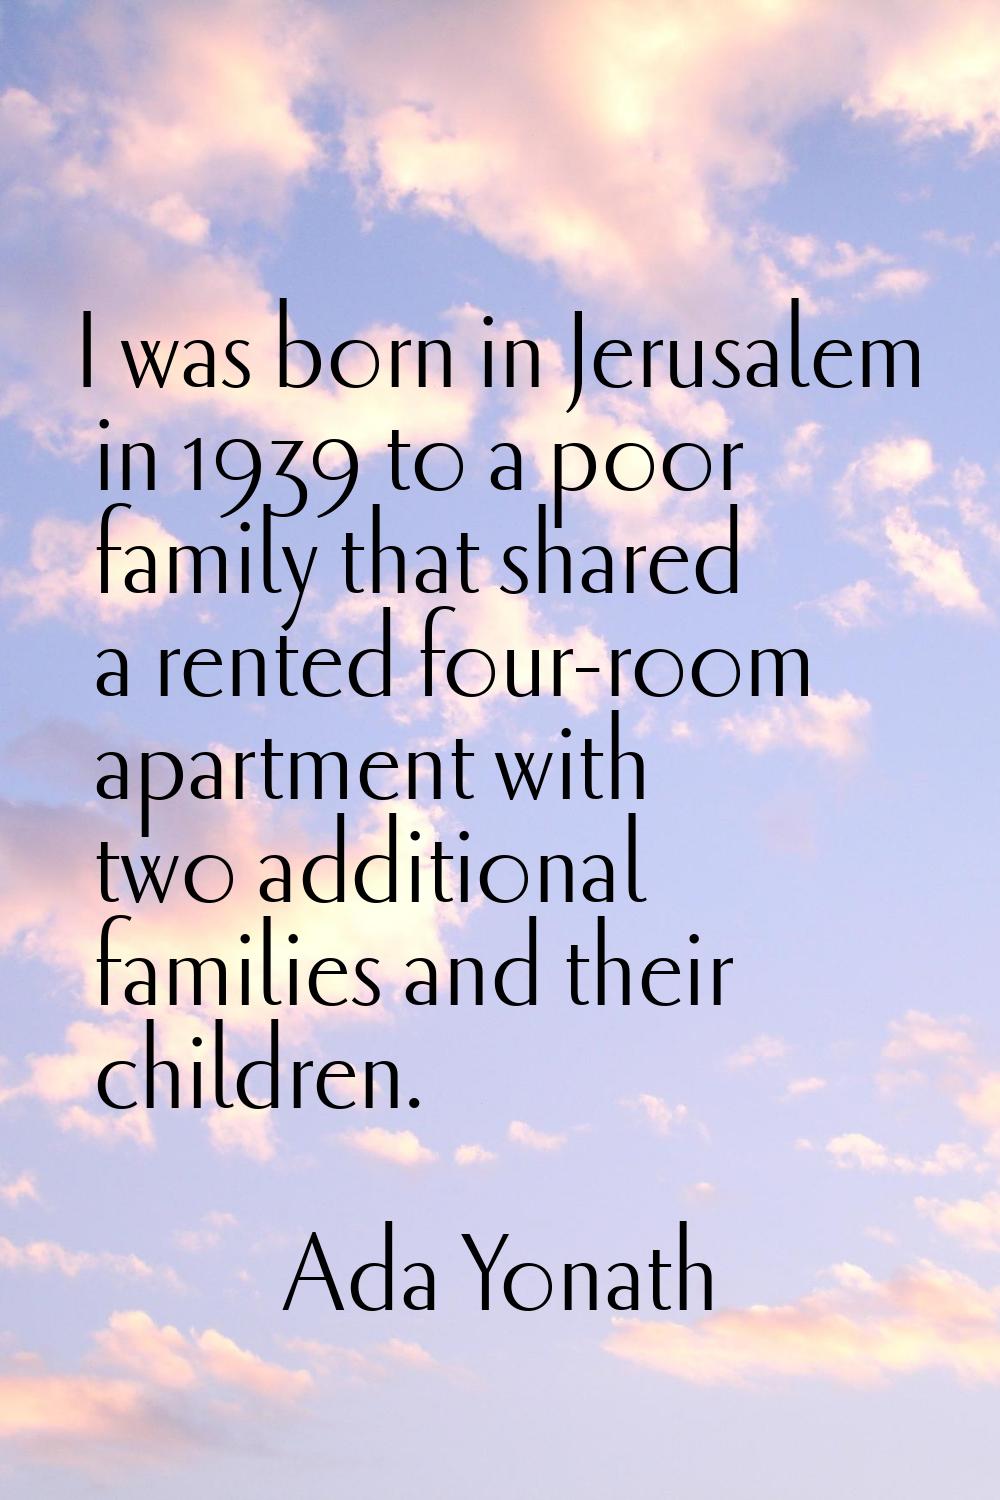 I was born in Jerusalem in 1939 to a poor family that shared a rented four-room apartment with two 